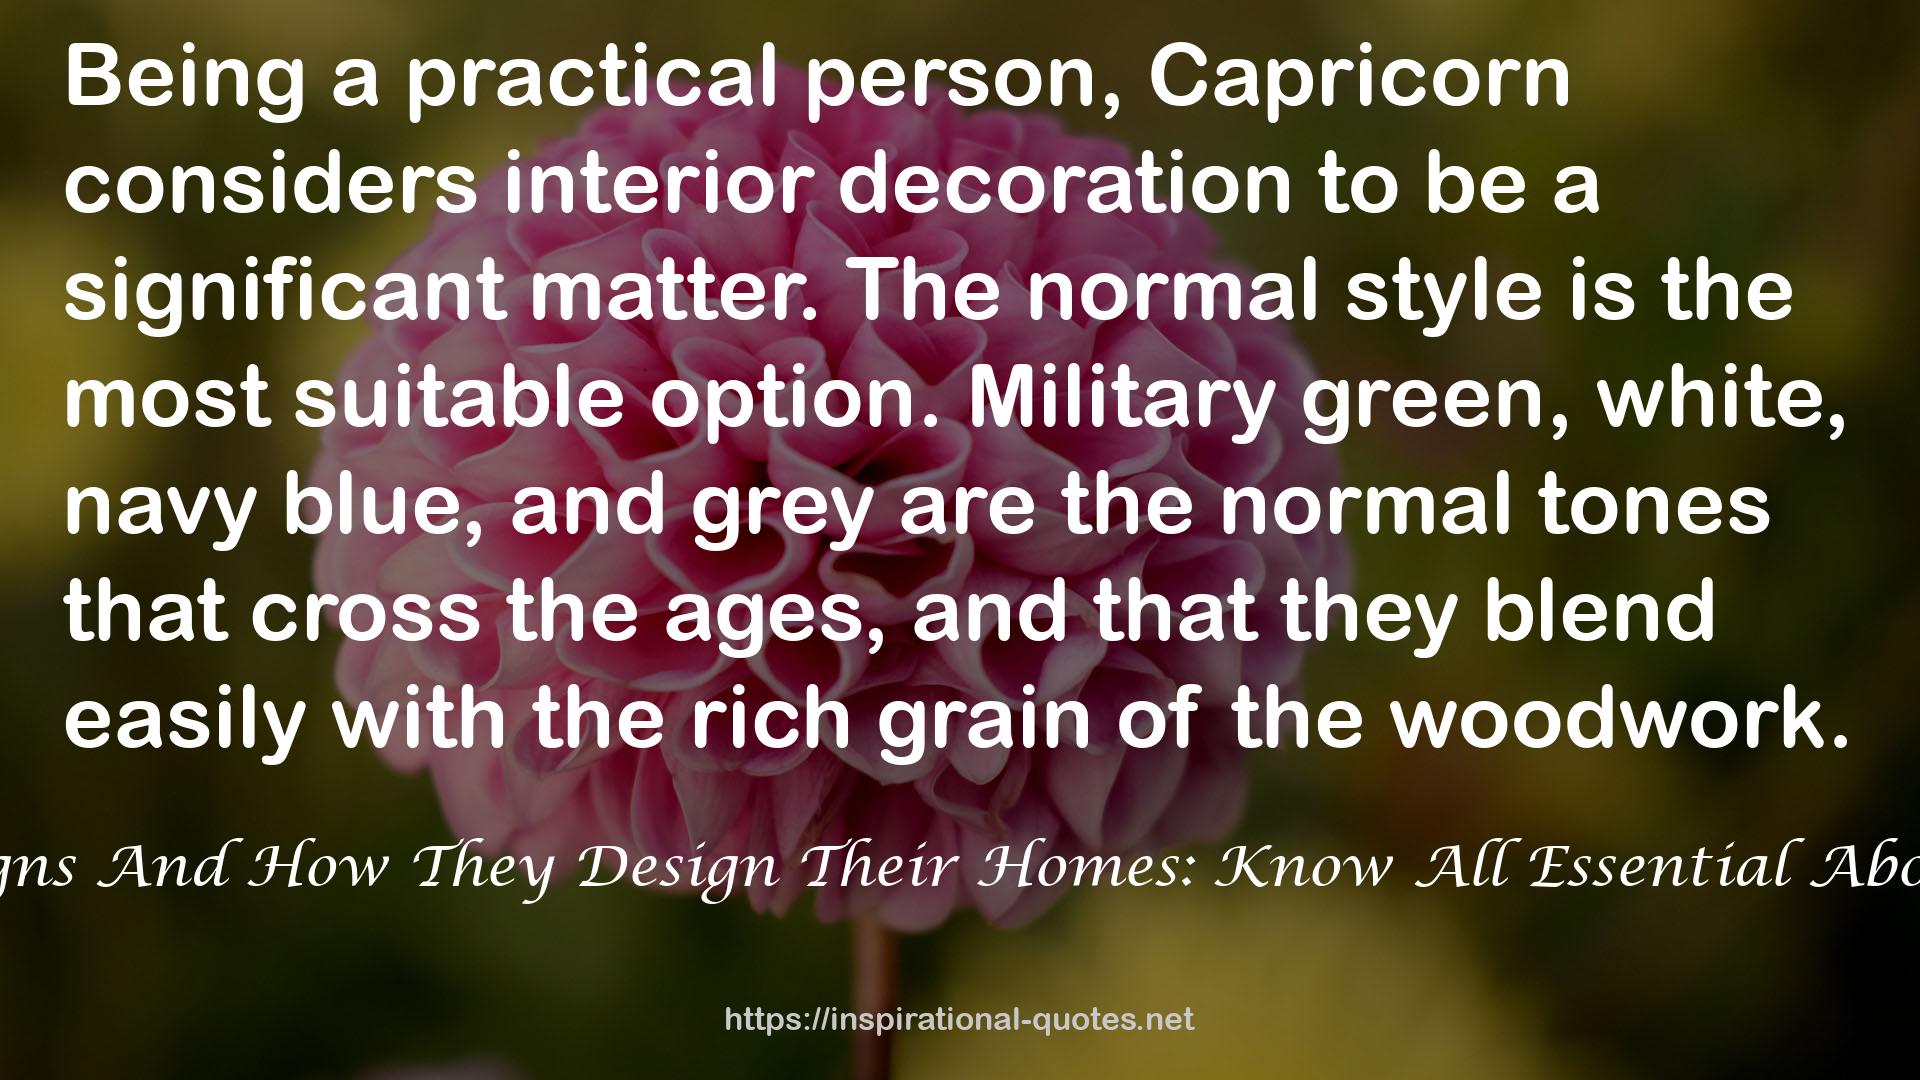 Zodiac Signs And How They Design Their Homes: Know All Essential About These 12 QUOTES